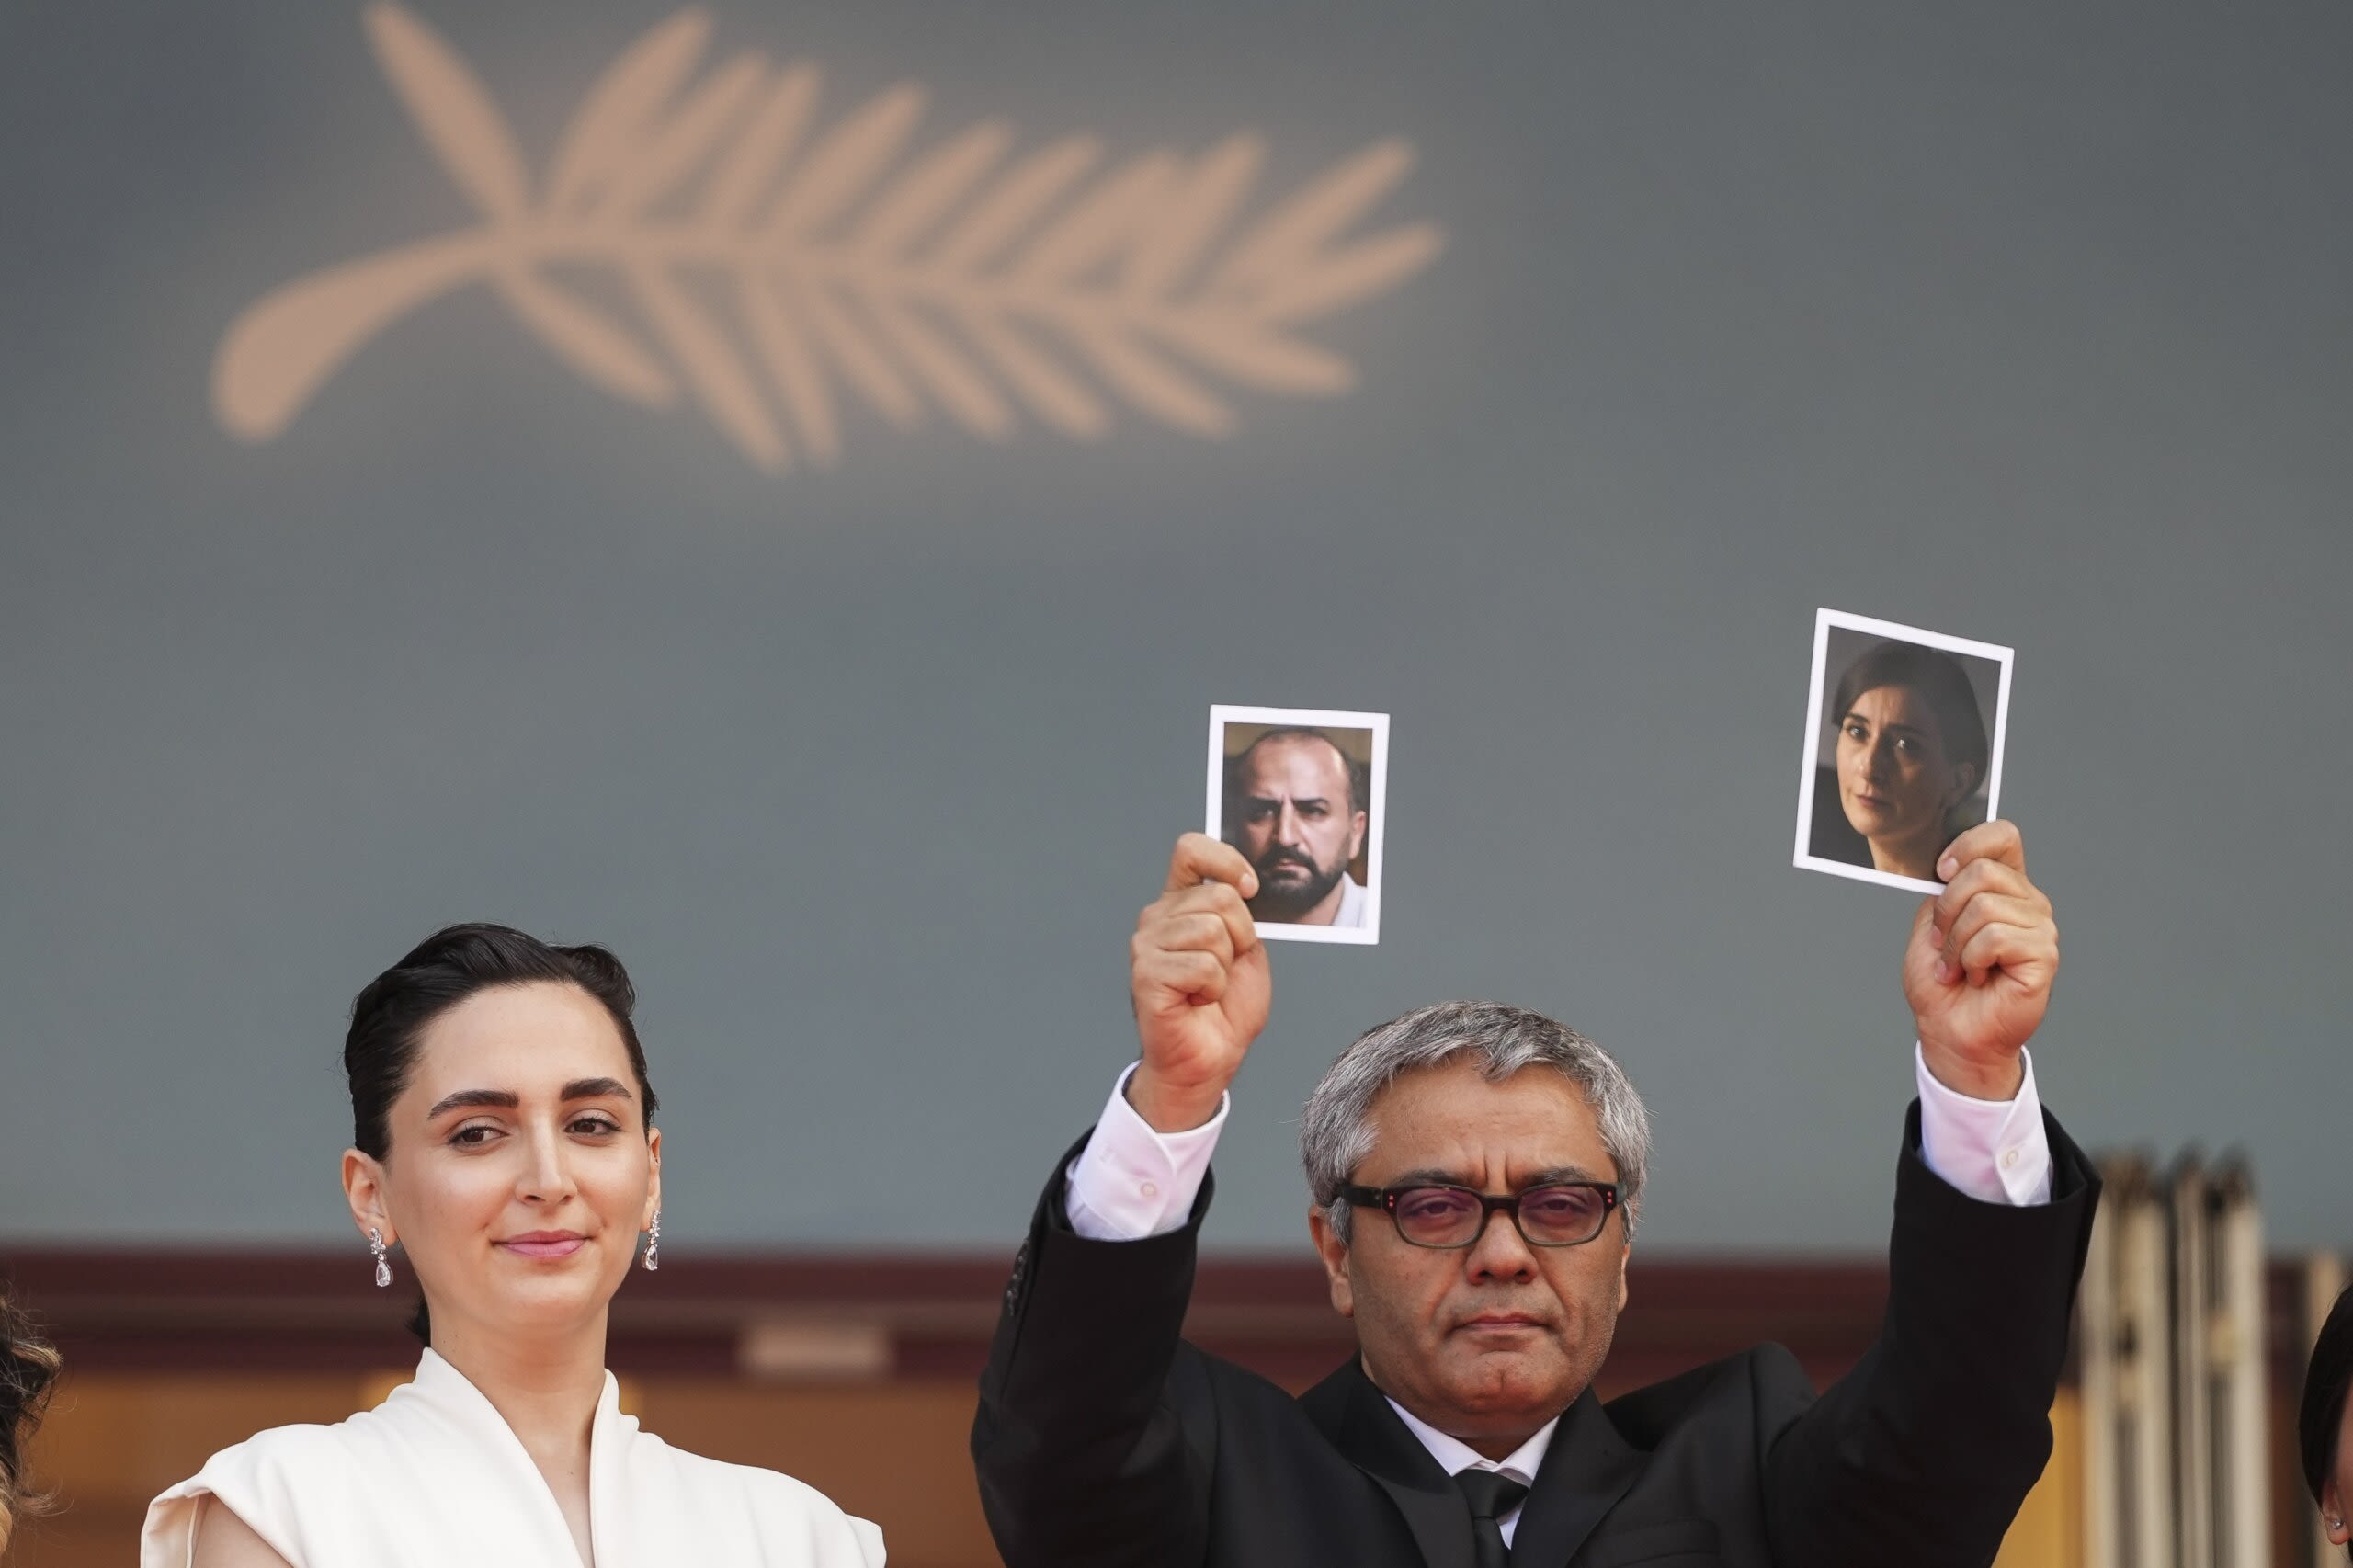 What will win the Palme d’Or? Cannes closes Saturday with awards and a tribute to George Lucas - WTOP News